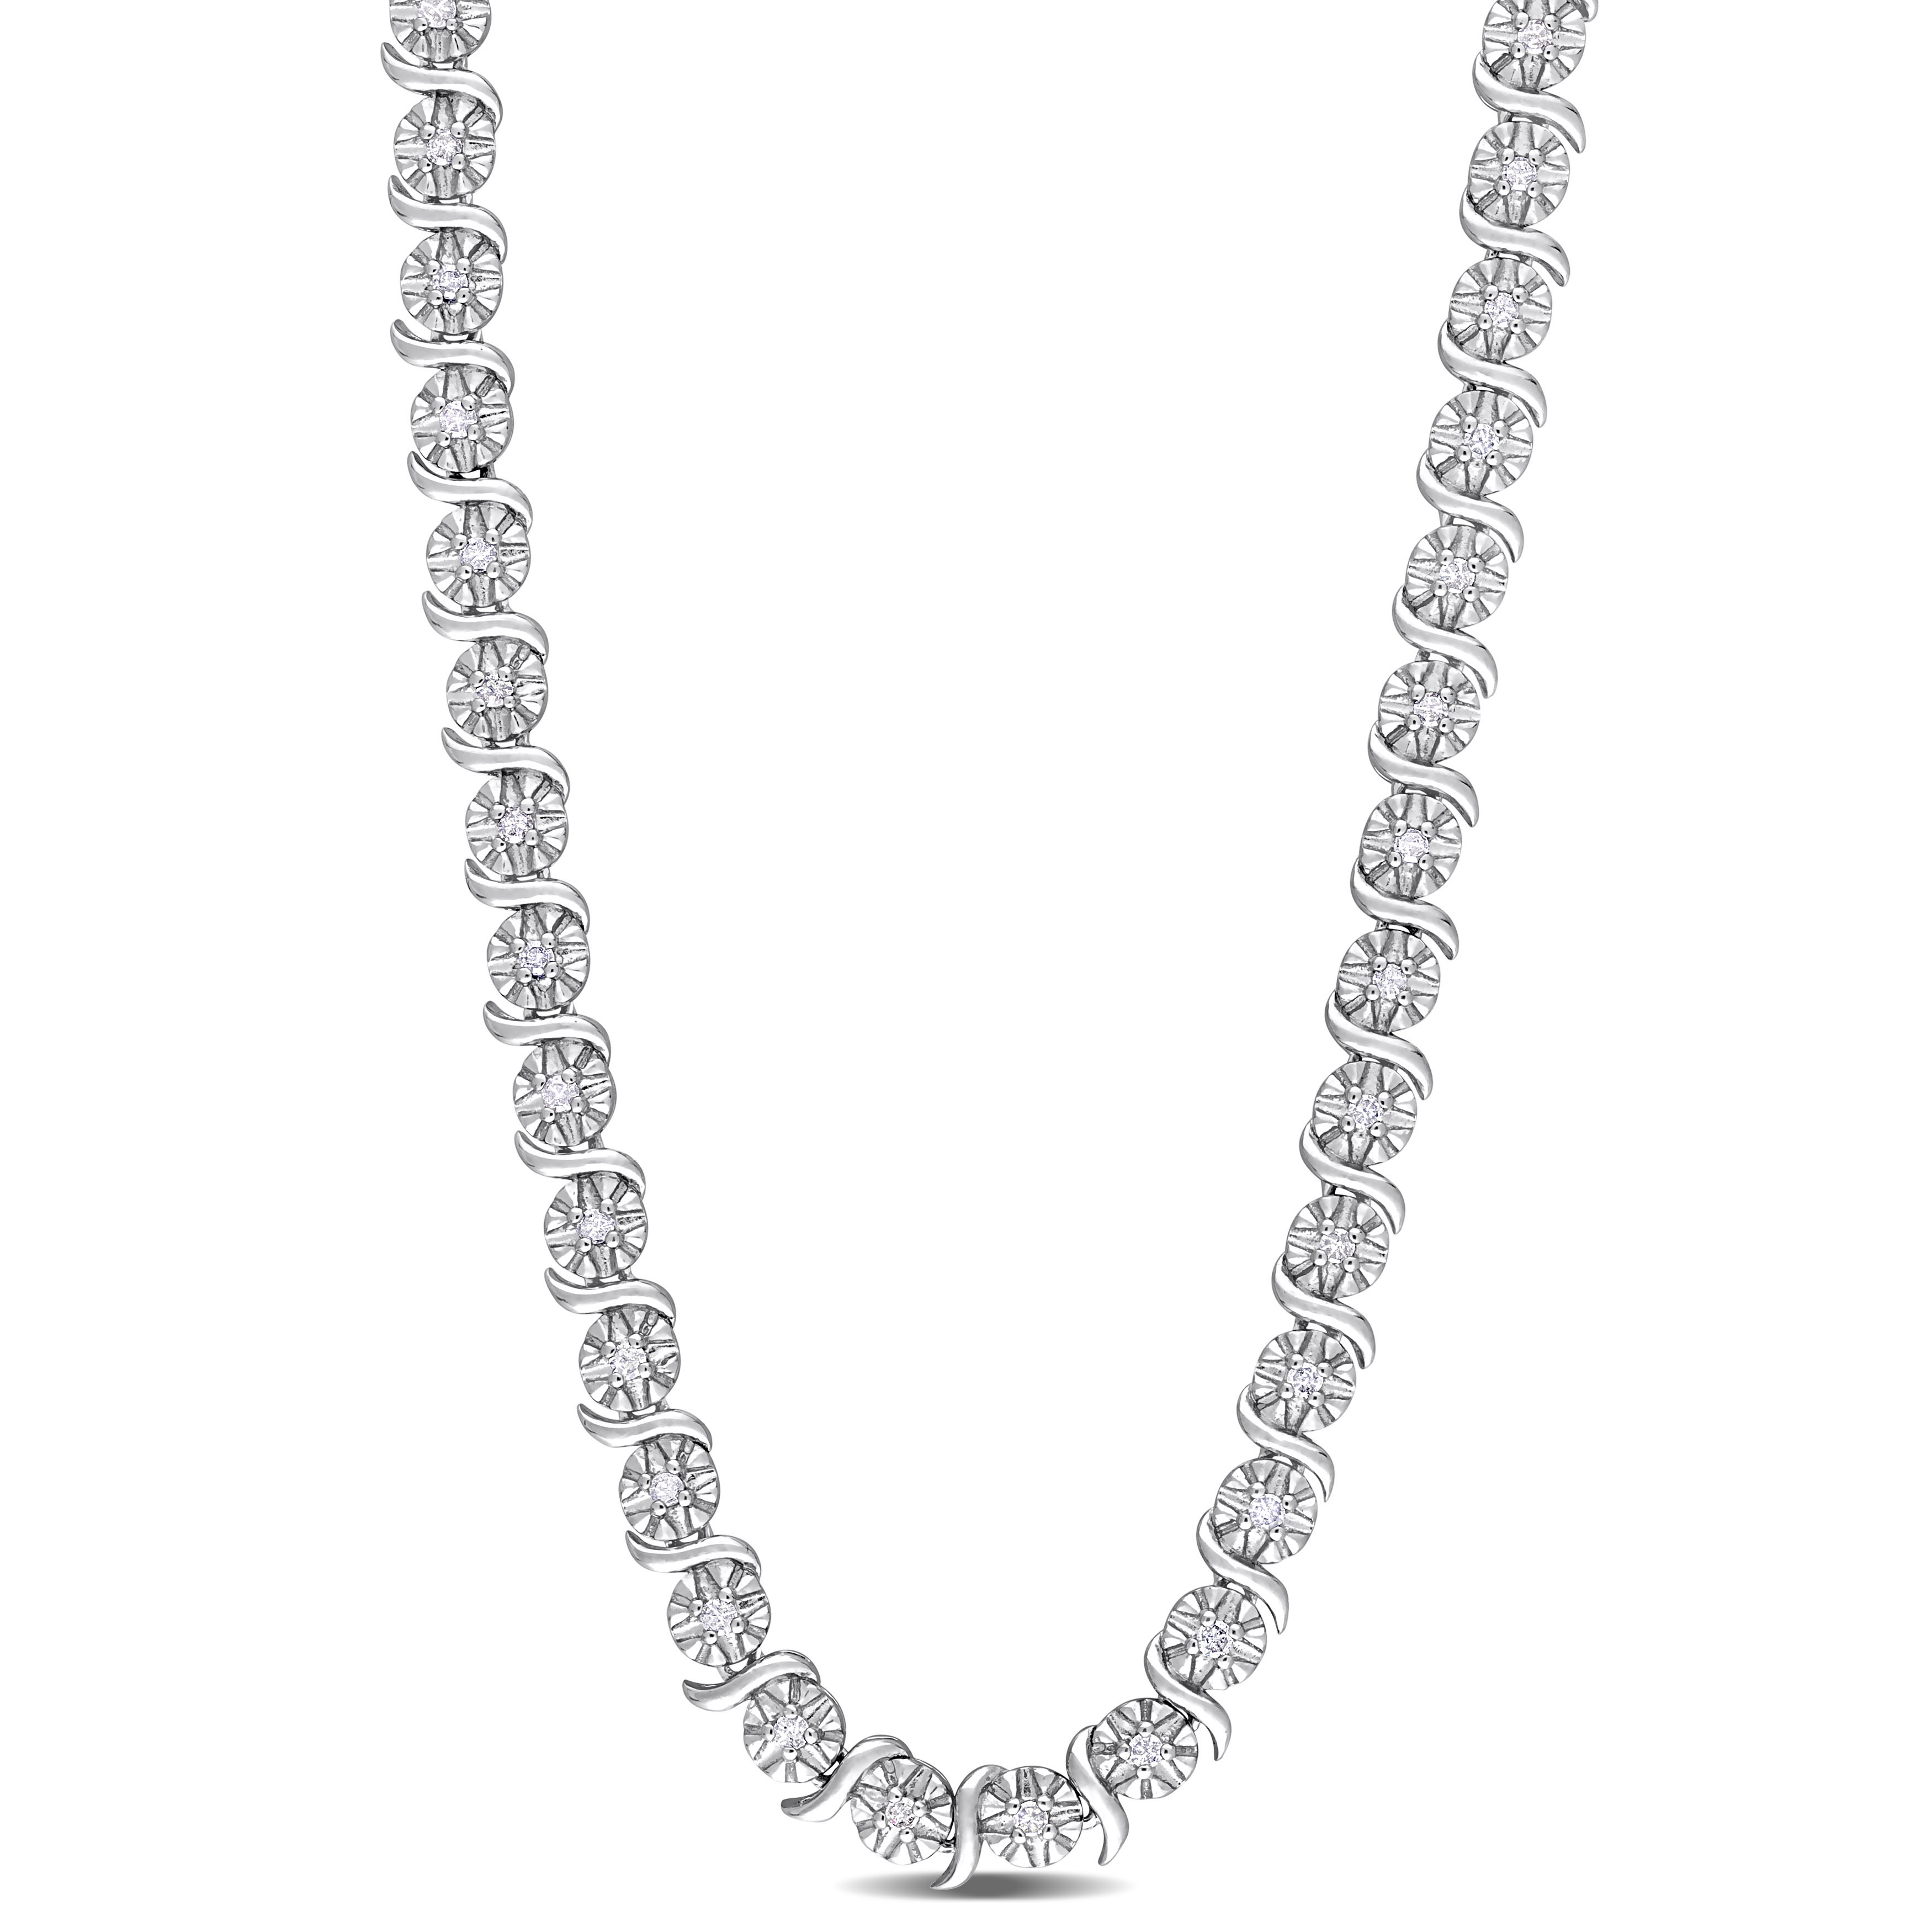 1/2 CT TW Diamond Necklace in Sterling Silver - 17 in.